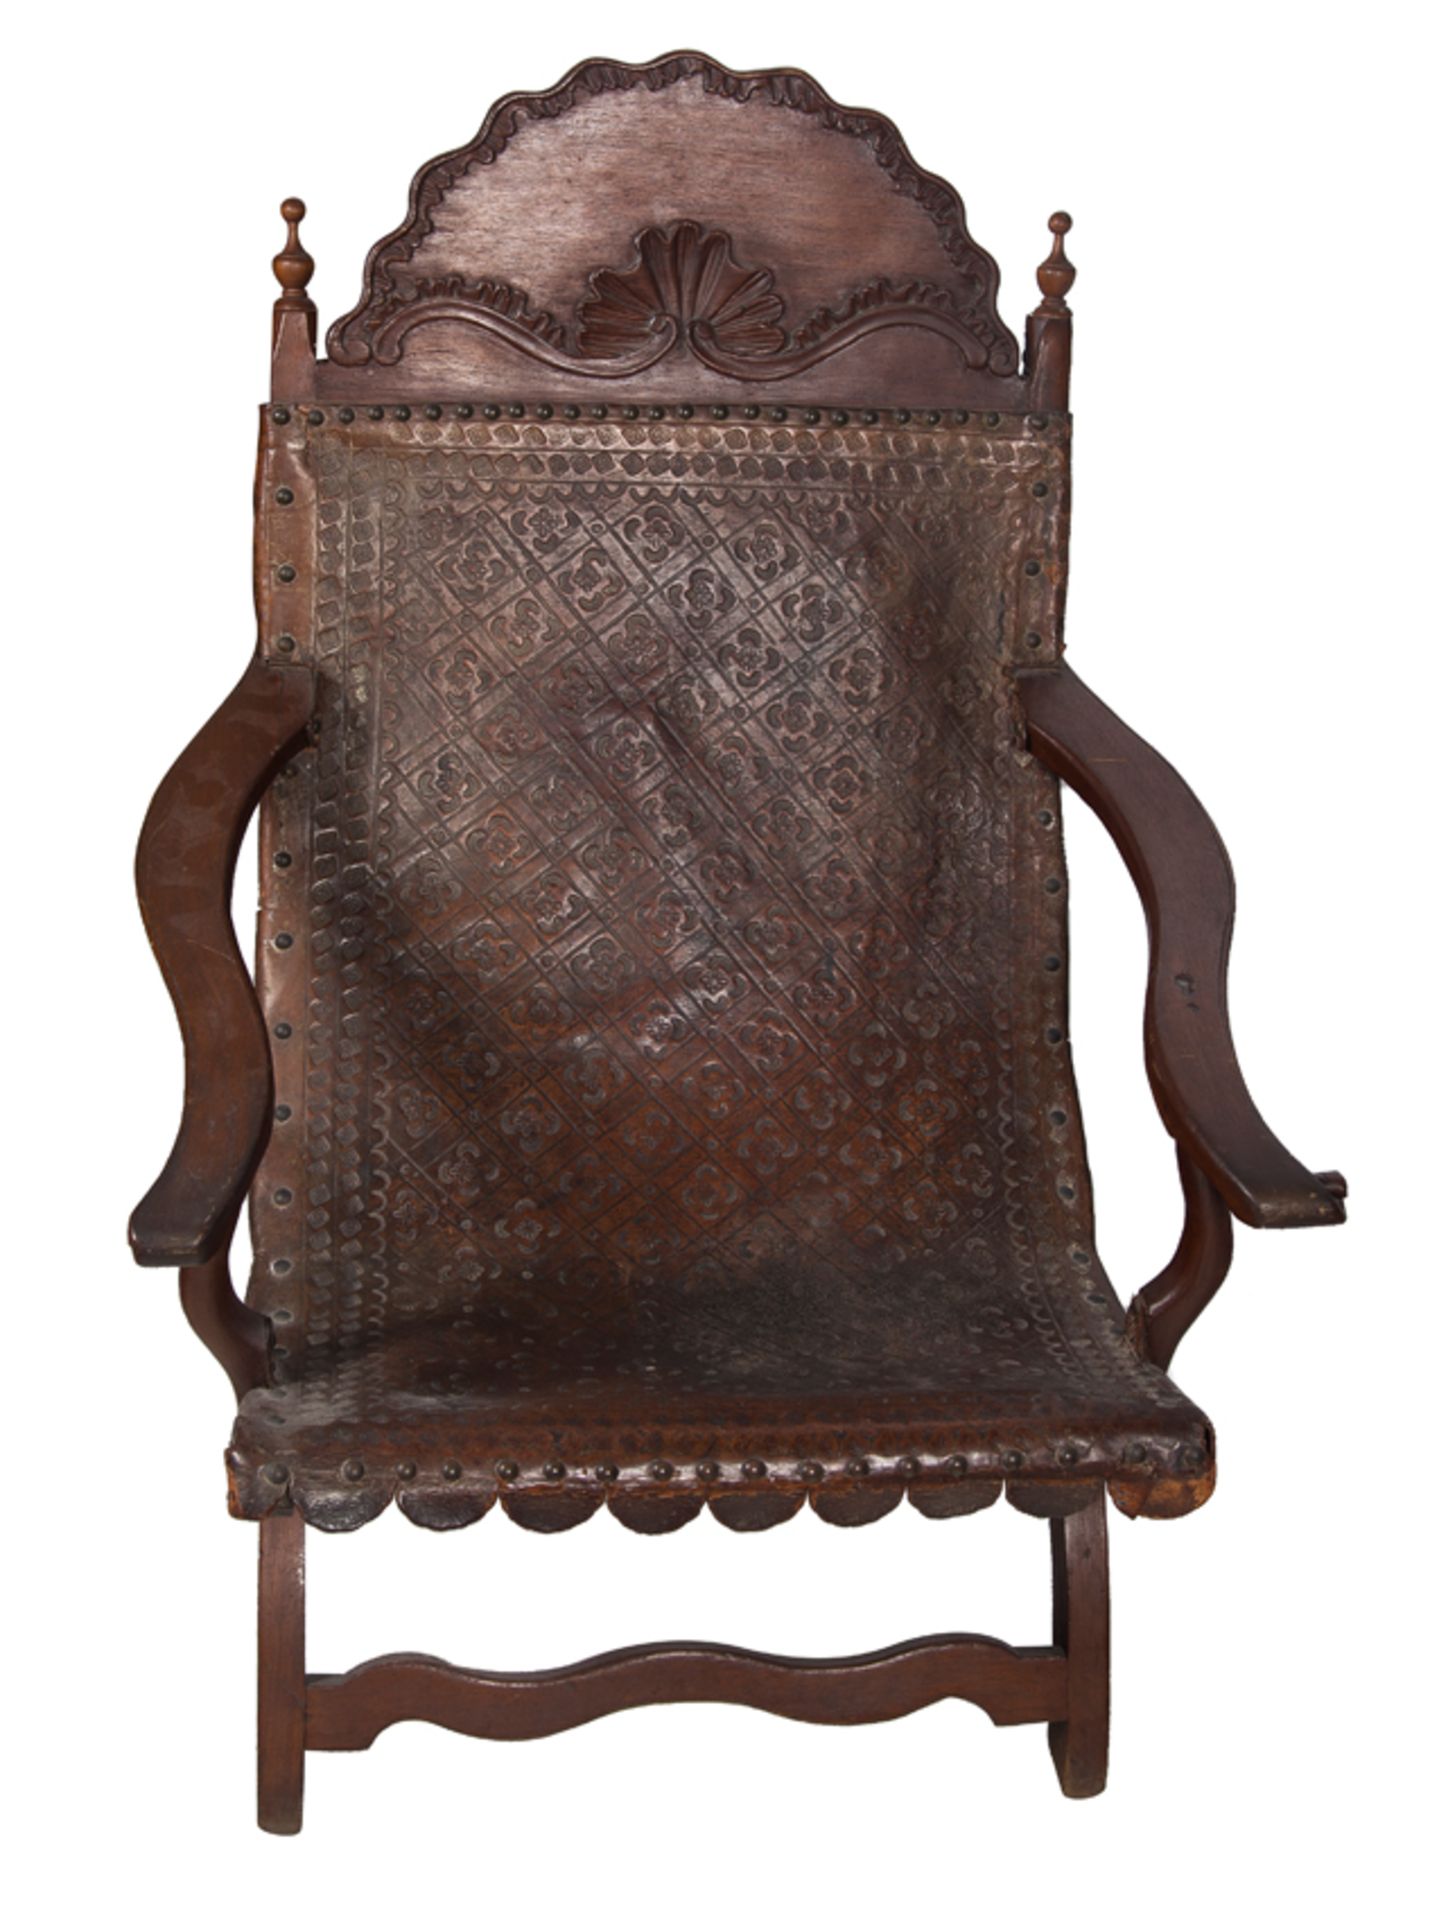 Pair of "Campeche" chairs. Made of cedar wood and leather. Mexico. Late 18th century. - Image 3 of 7